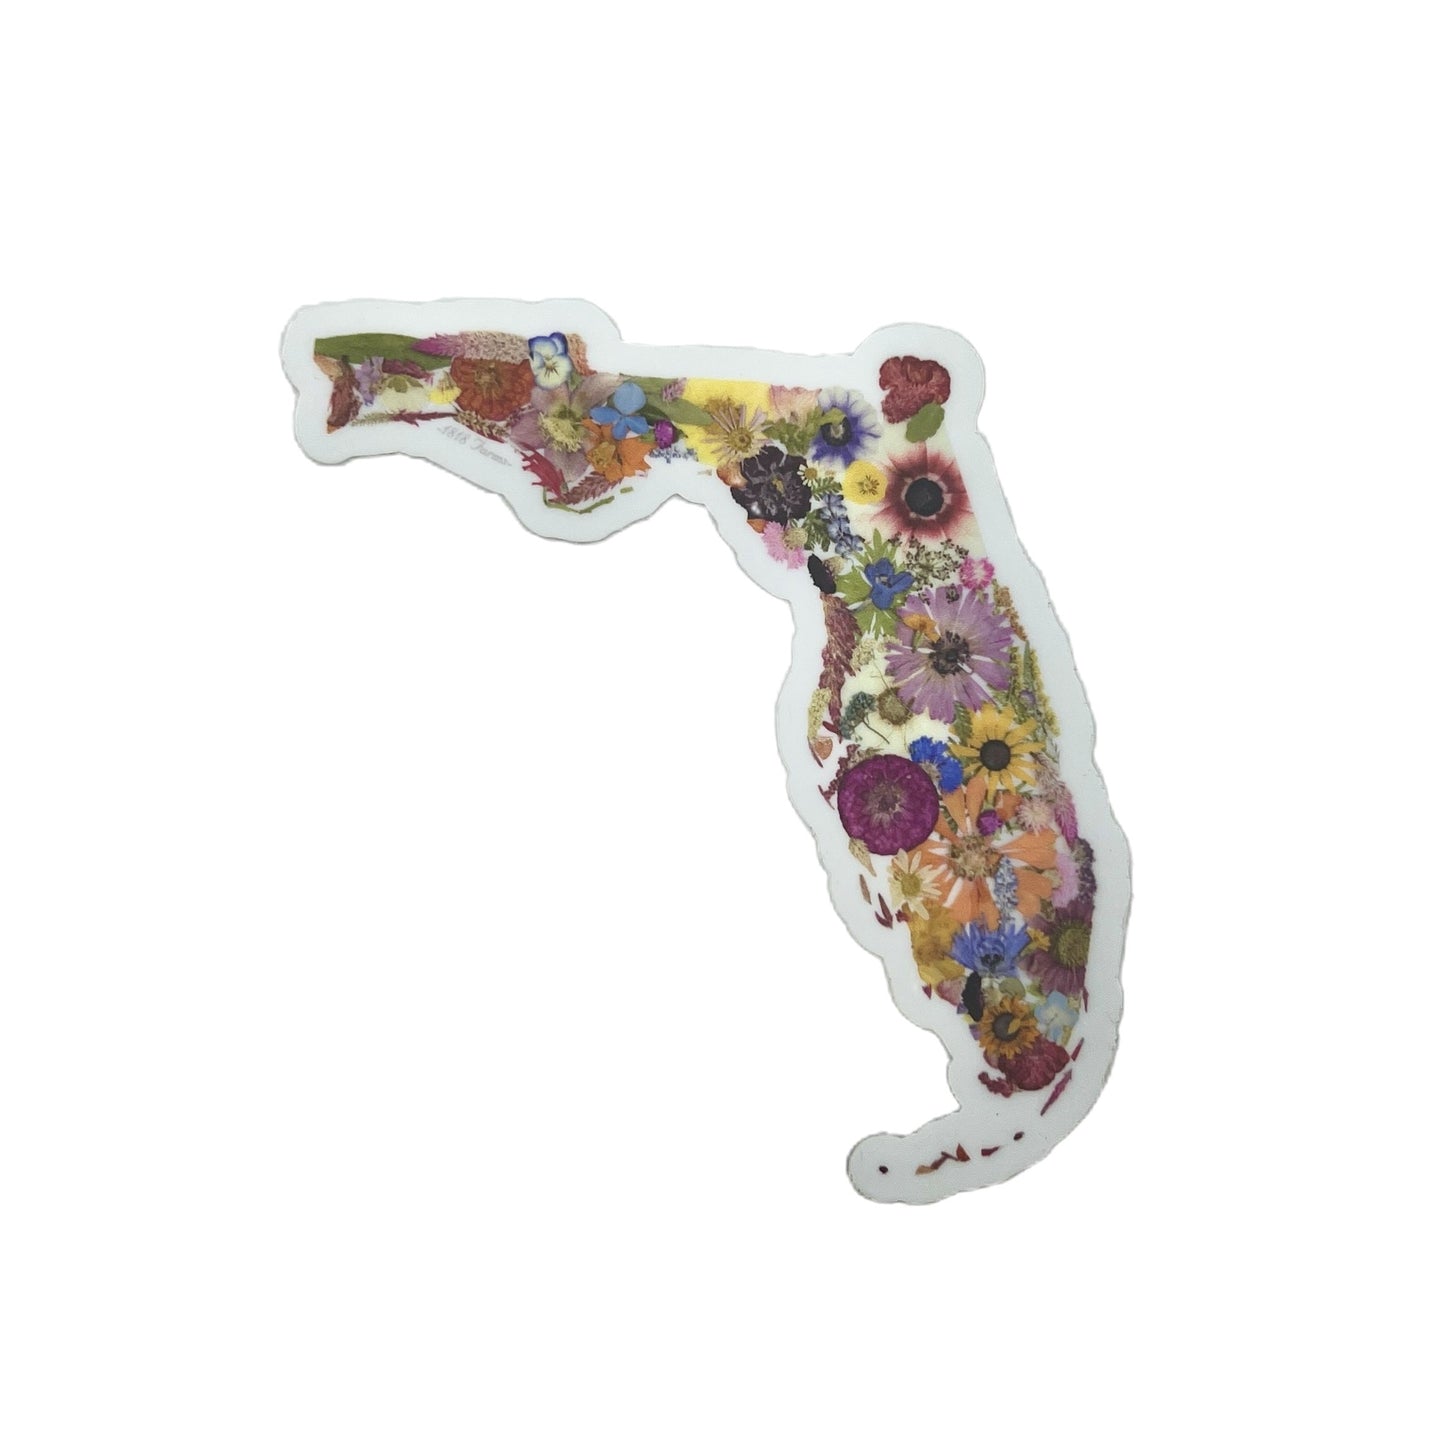 State Themed Vinyl Sticker Featuring Dried, Pressed Flowers - "Where I Bloom" Collection Vinyl Sticker 1818 Farms Florida  